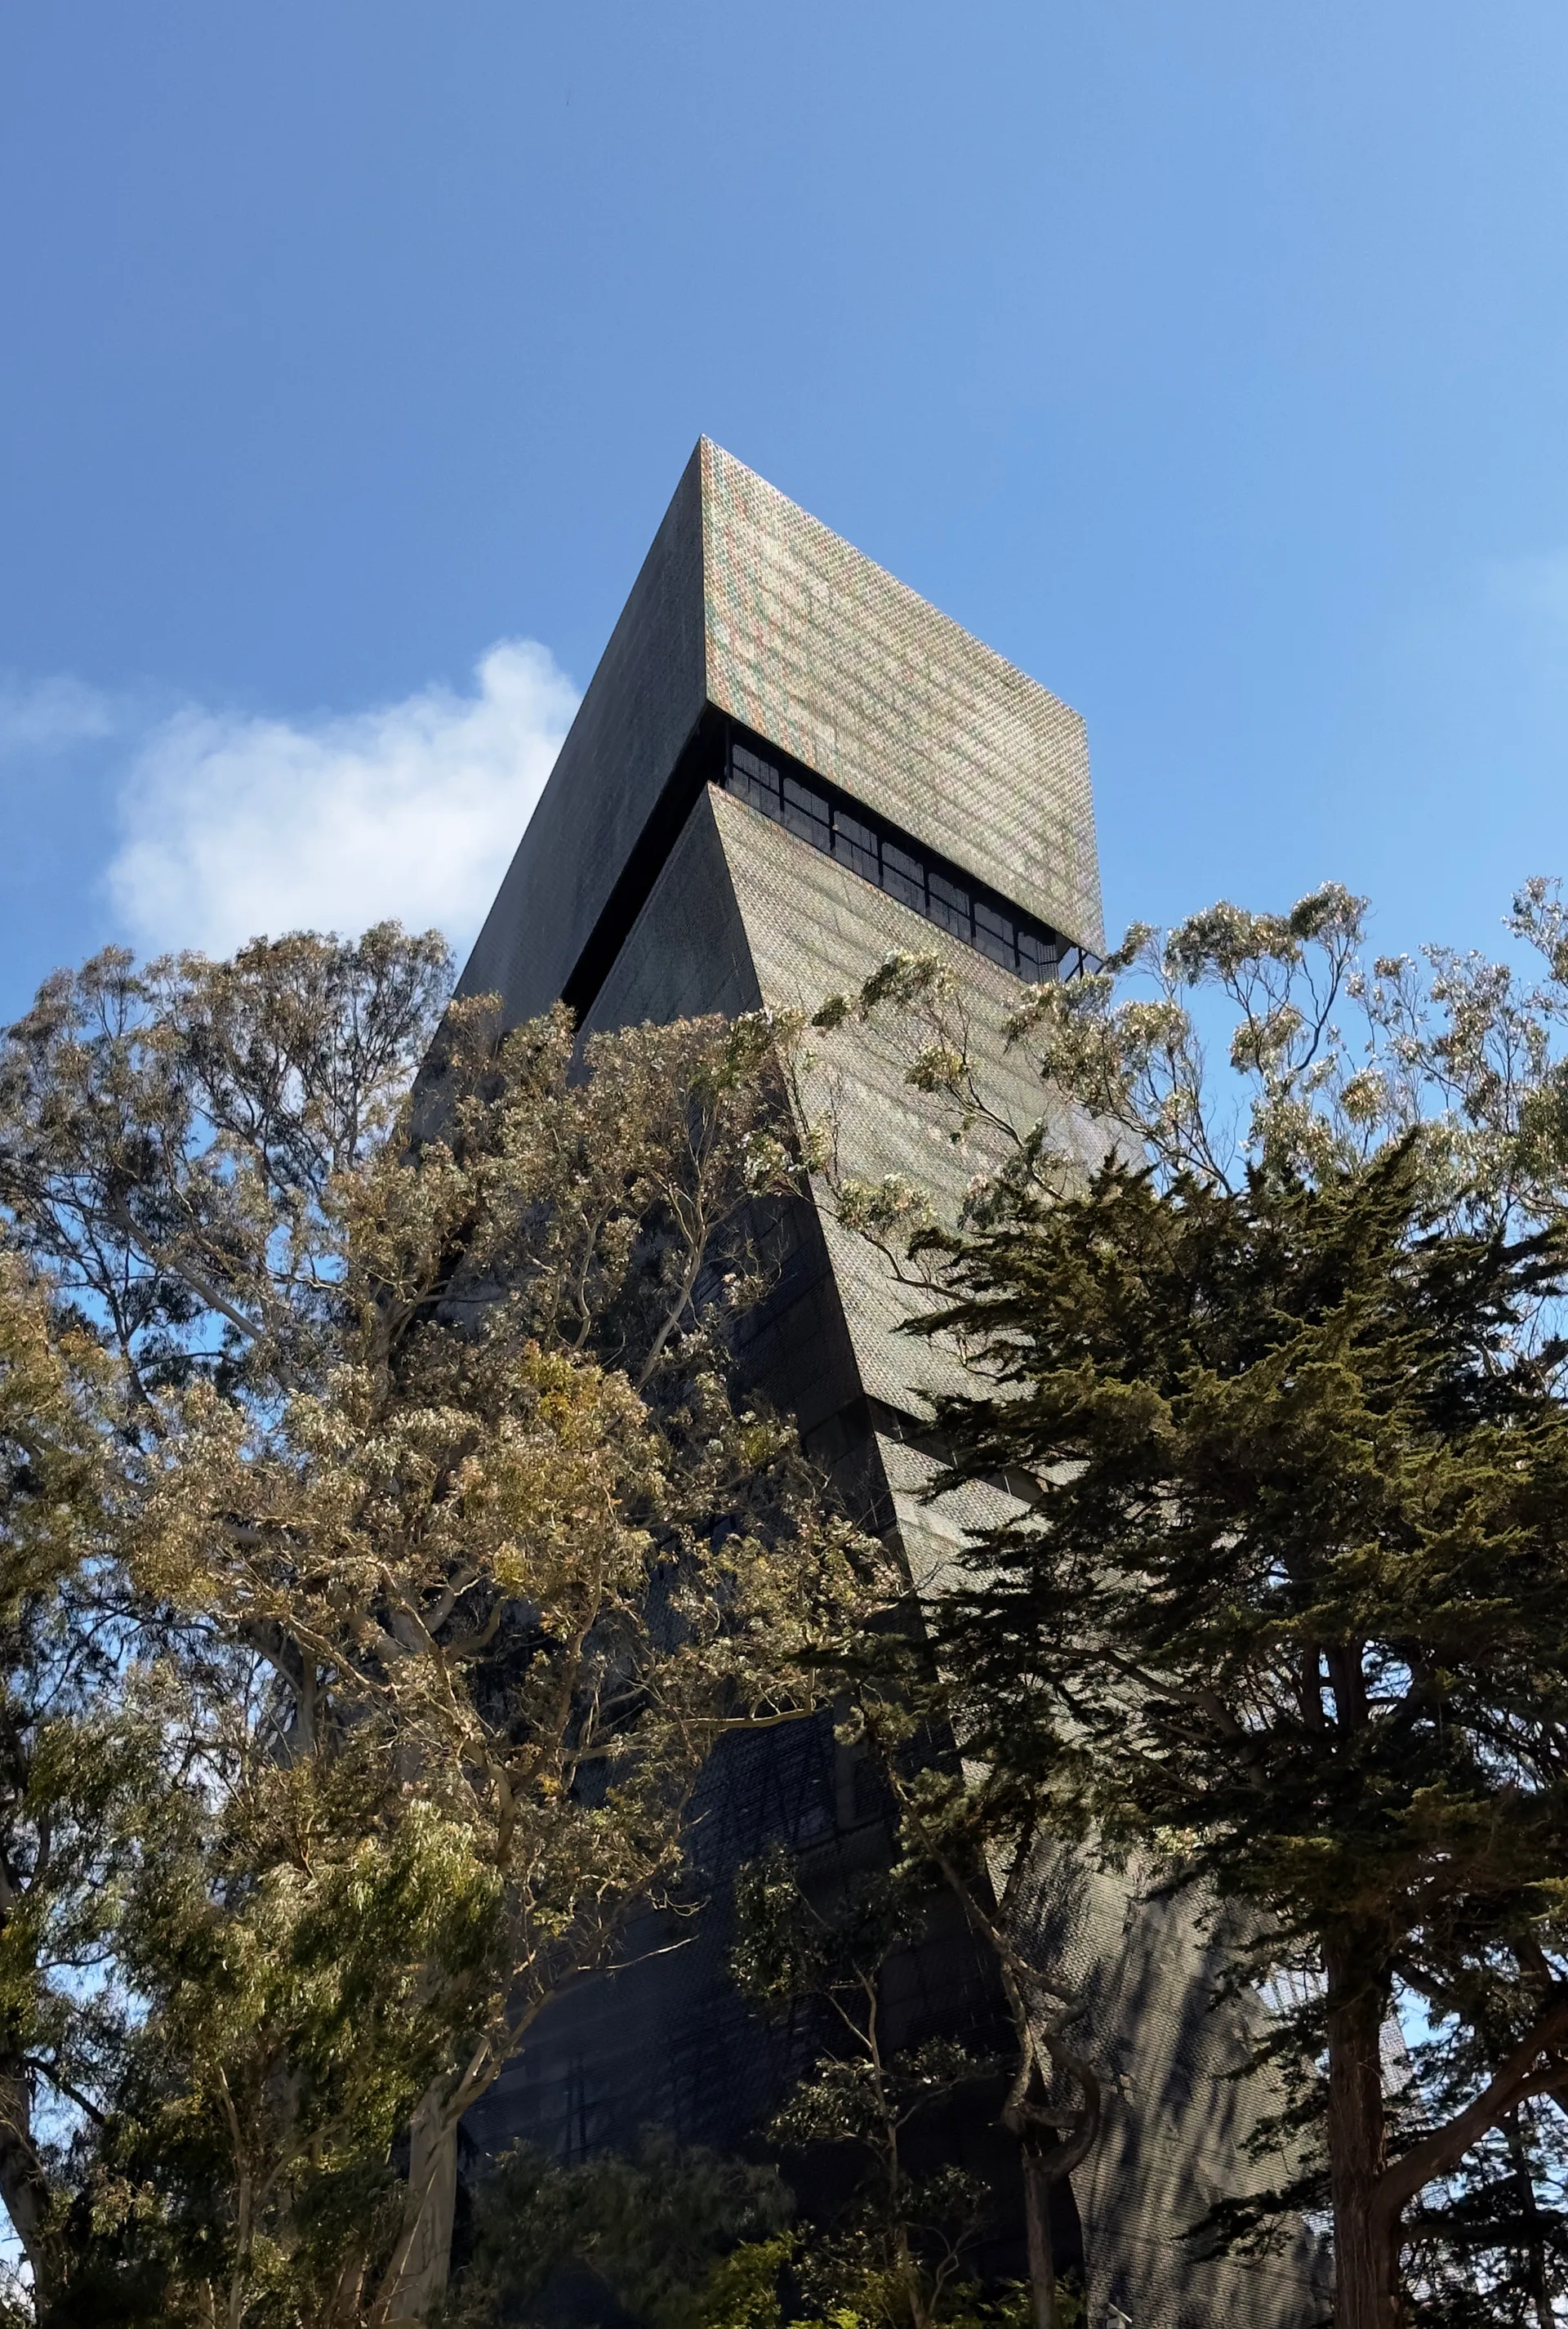 de Young Museum looming over the trees